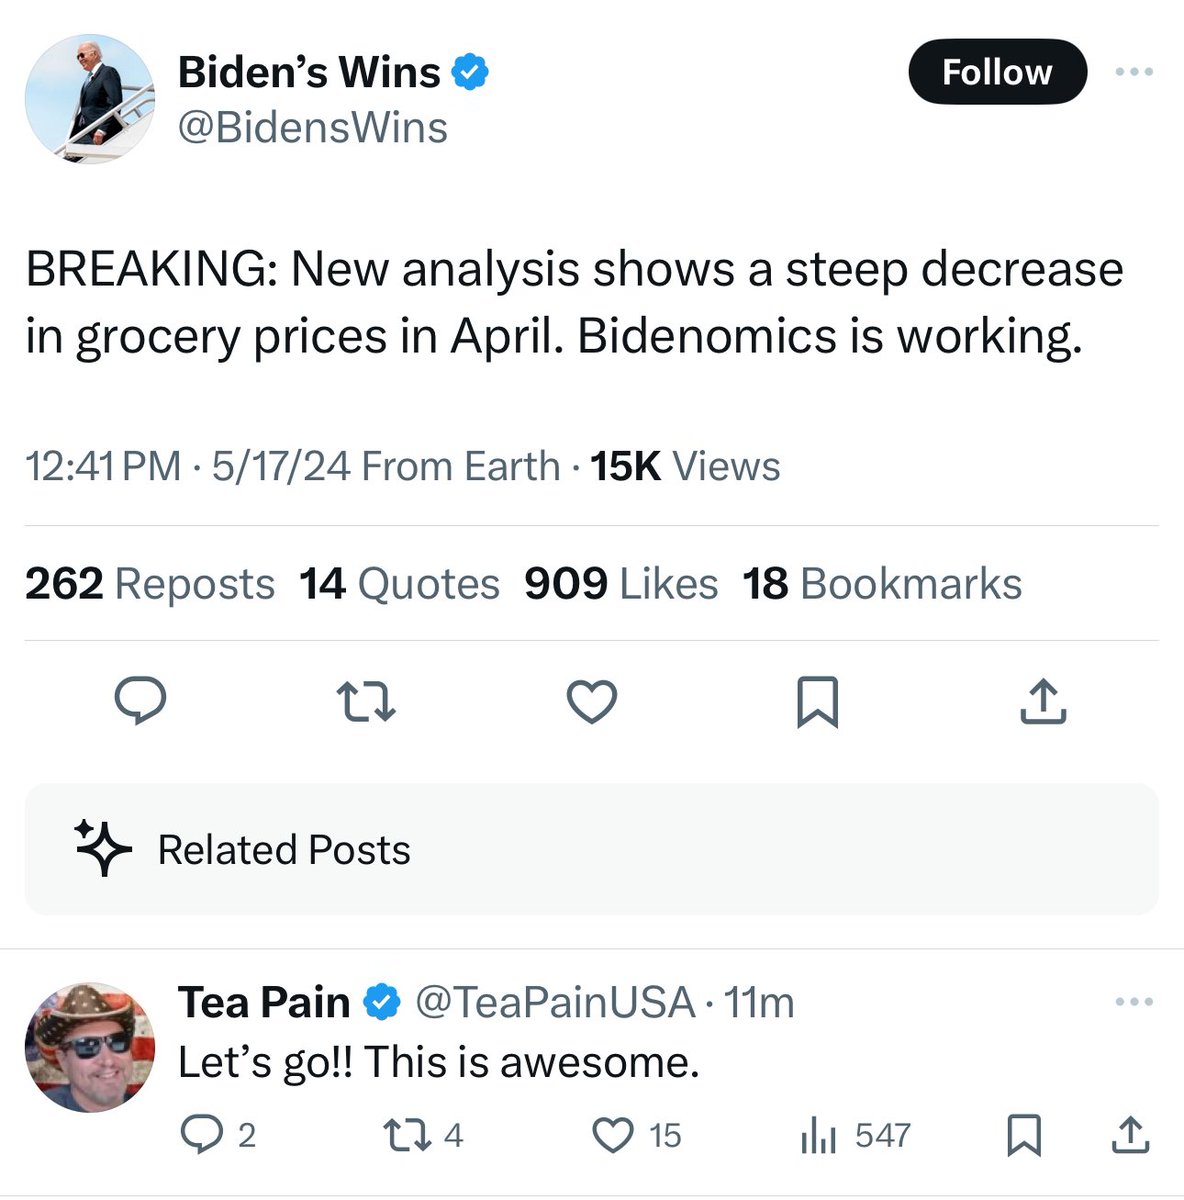 Look at these two stupid motherfuckers, @BidensWins and @TeaPainUSA. Apparently they didn’t get the memo from the Biden administration that Bideomics fell flat on its face and they’re not using the term anymore. These two are embarrassing @JoeBiden.